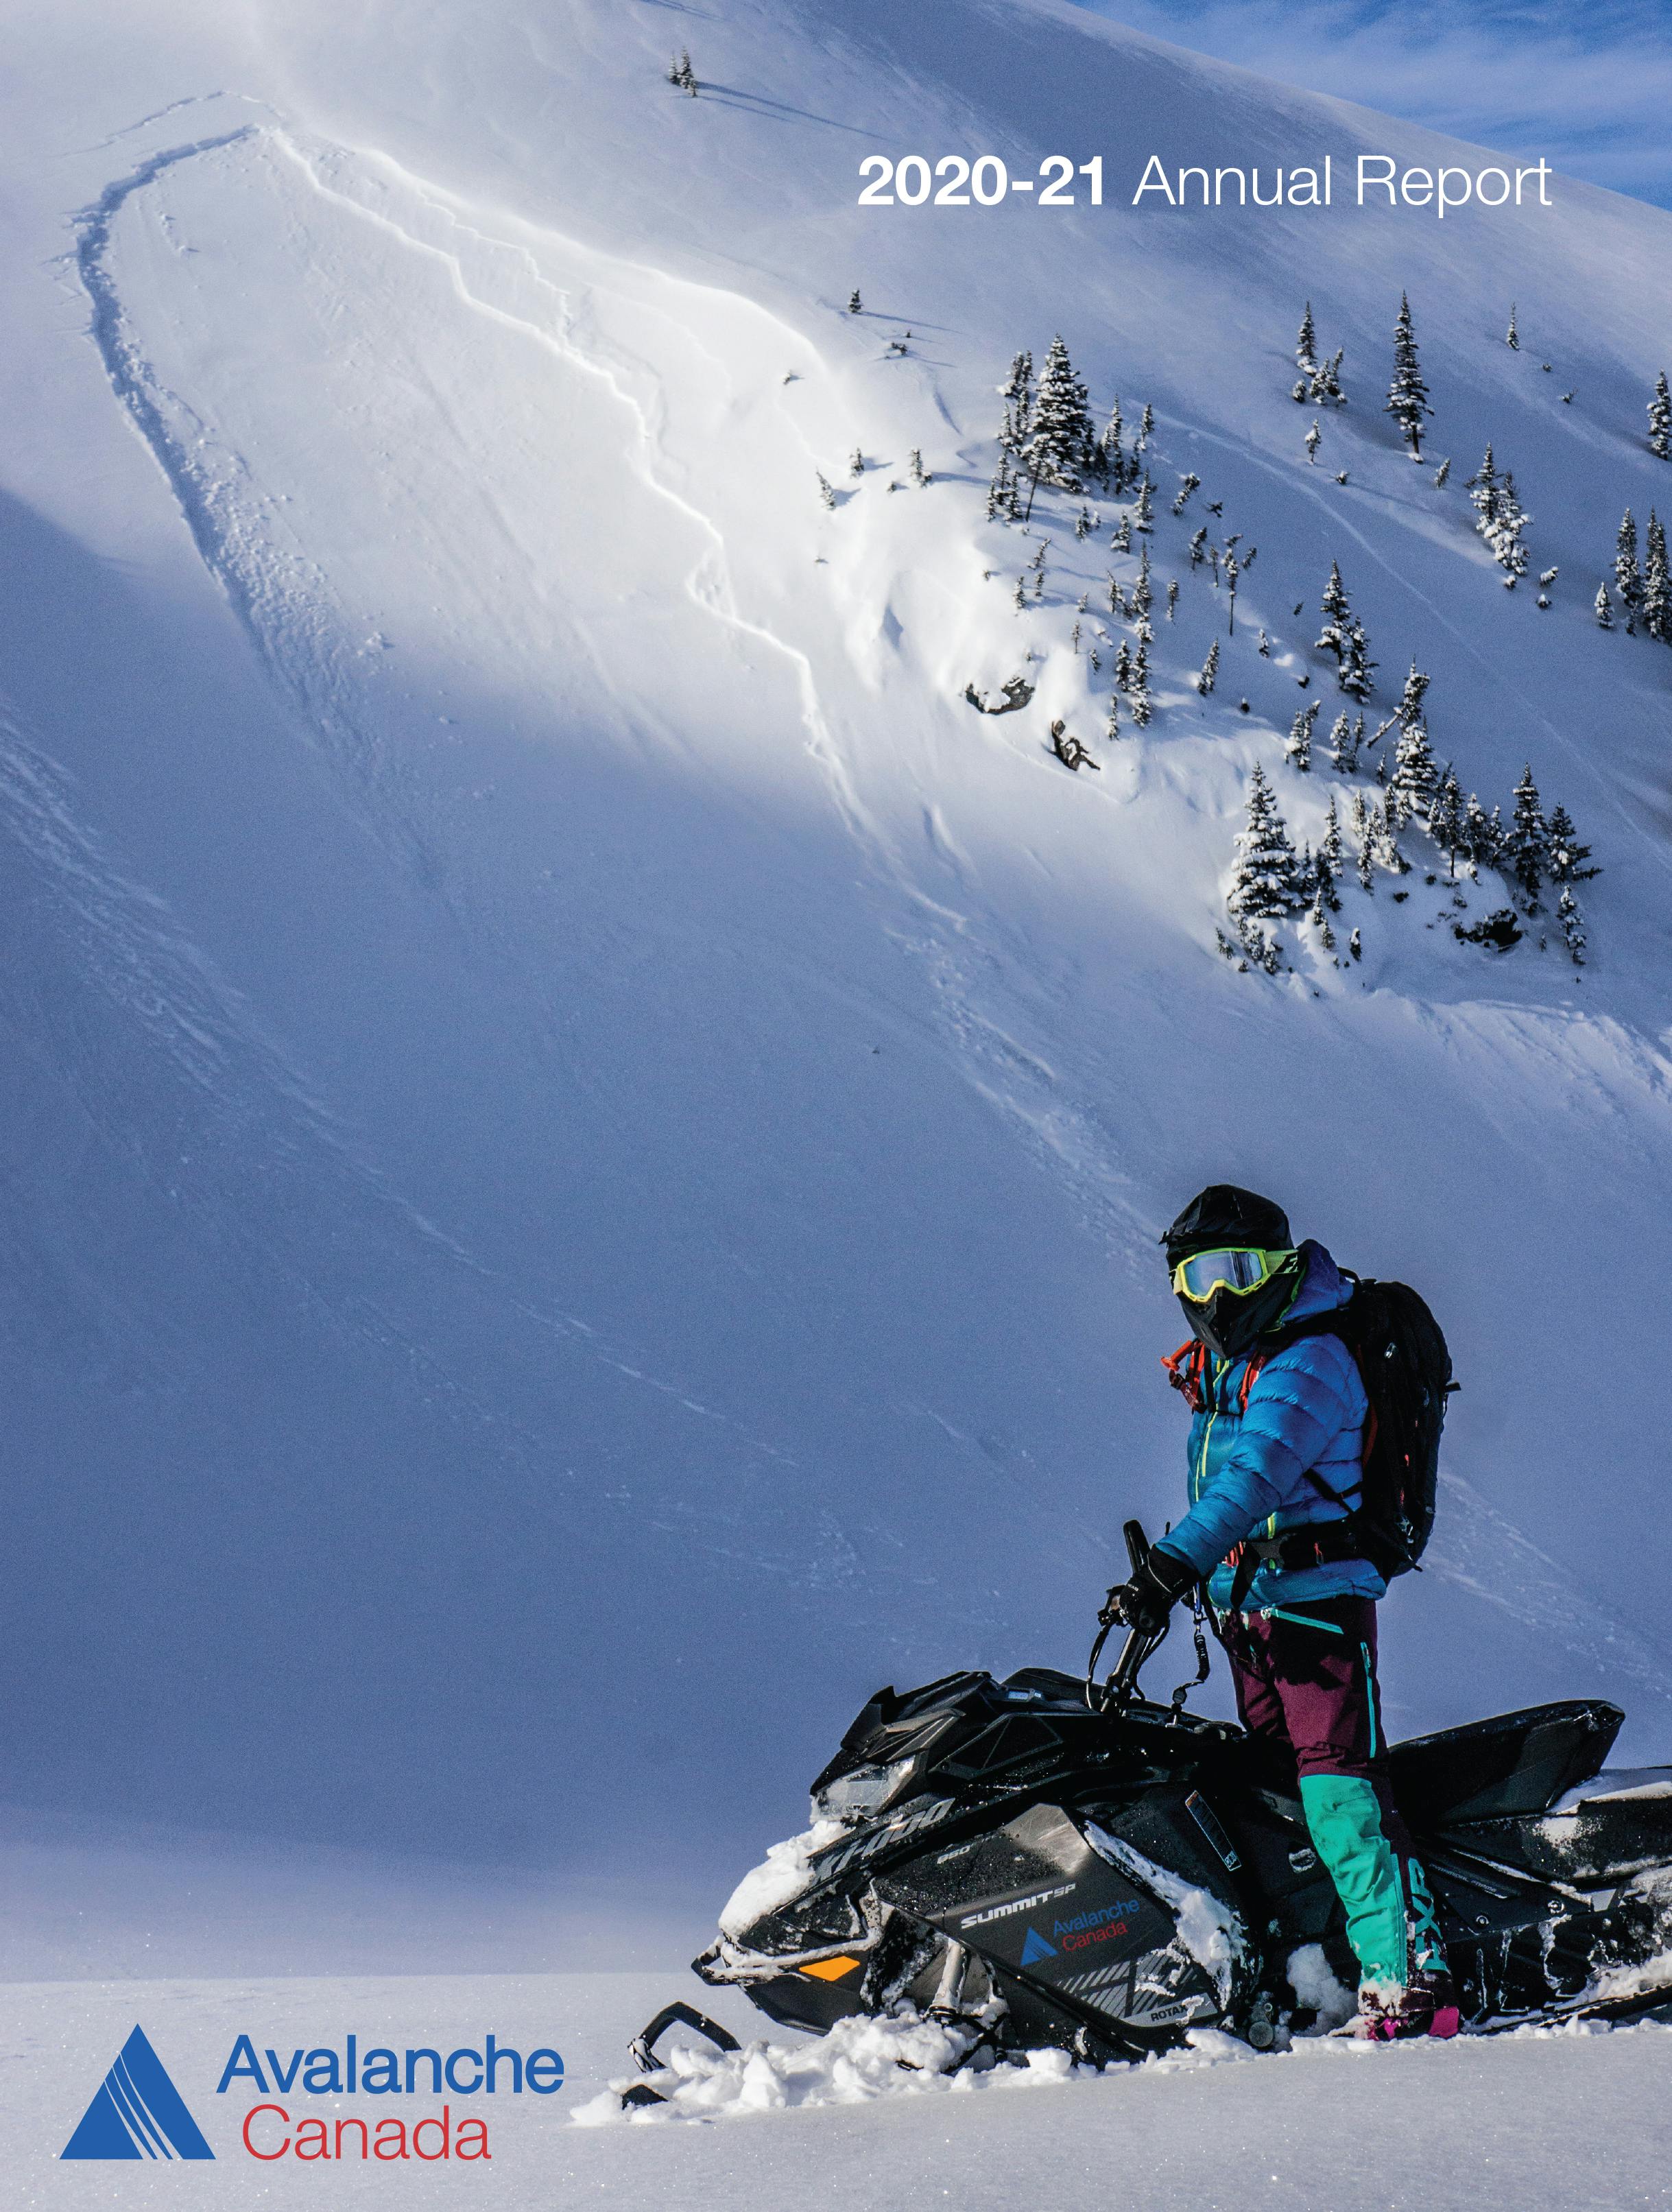 The cover of the 2020-21 Annual Report shows a snowmobiler in the mountains, with a large avalanche on a slope in the background.